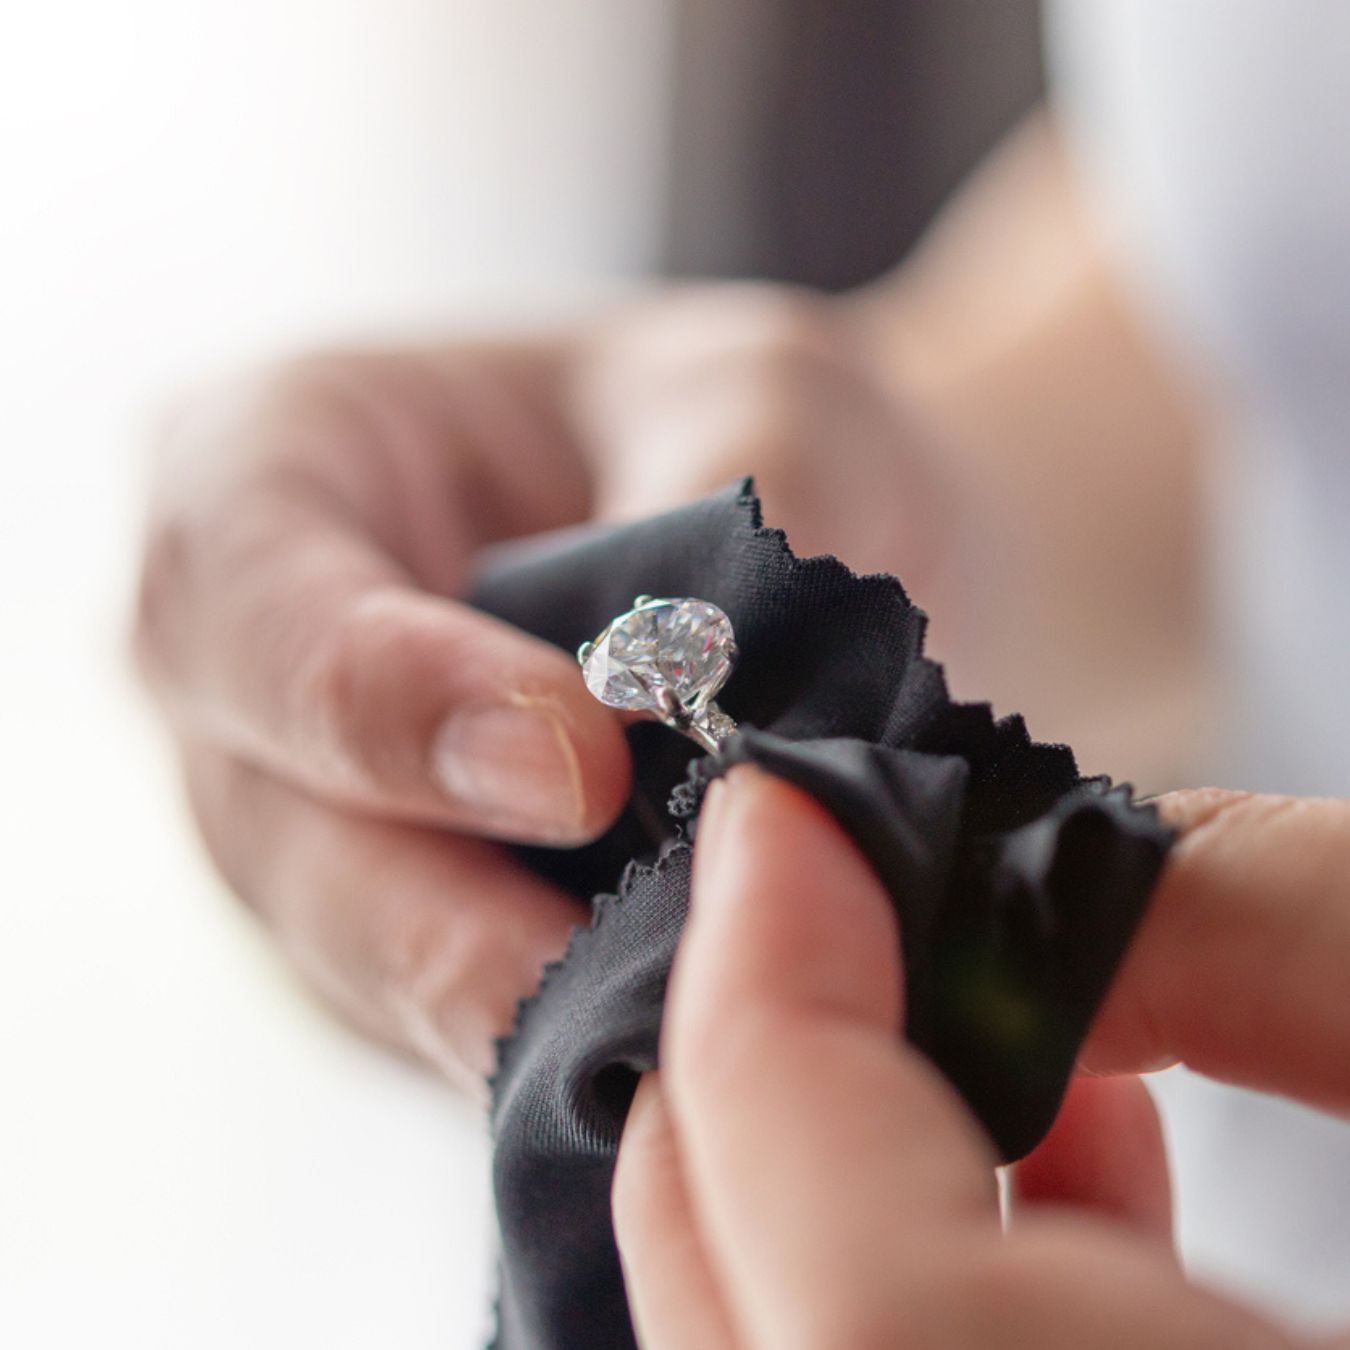 How to care for your diamond jewellery